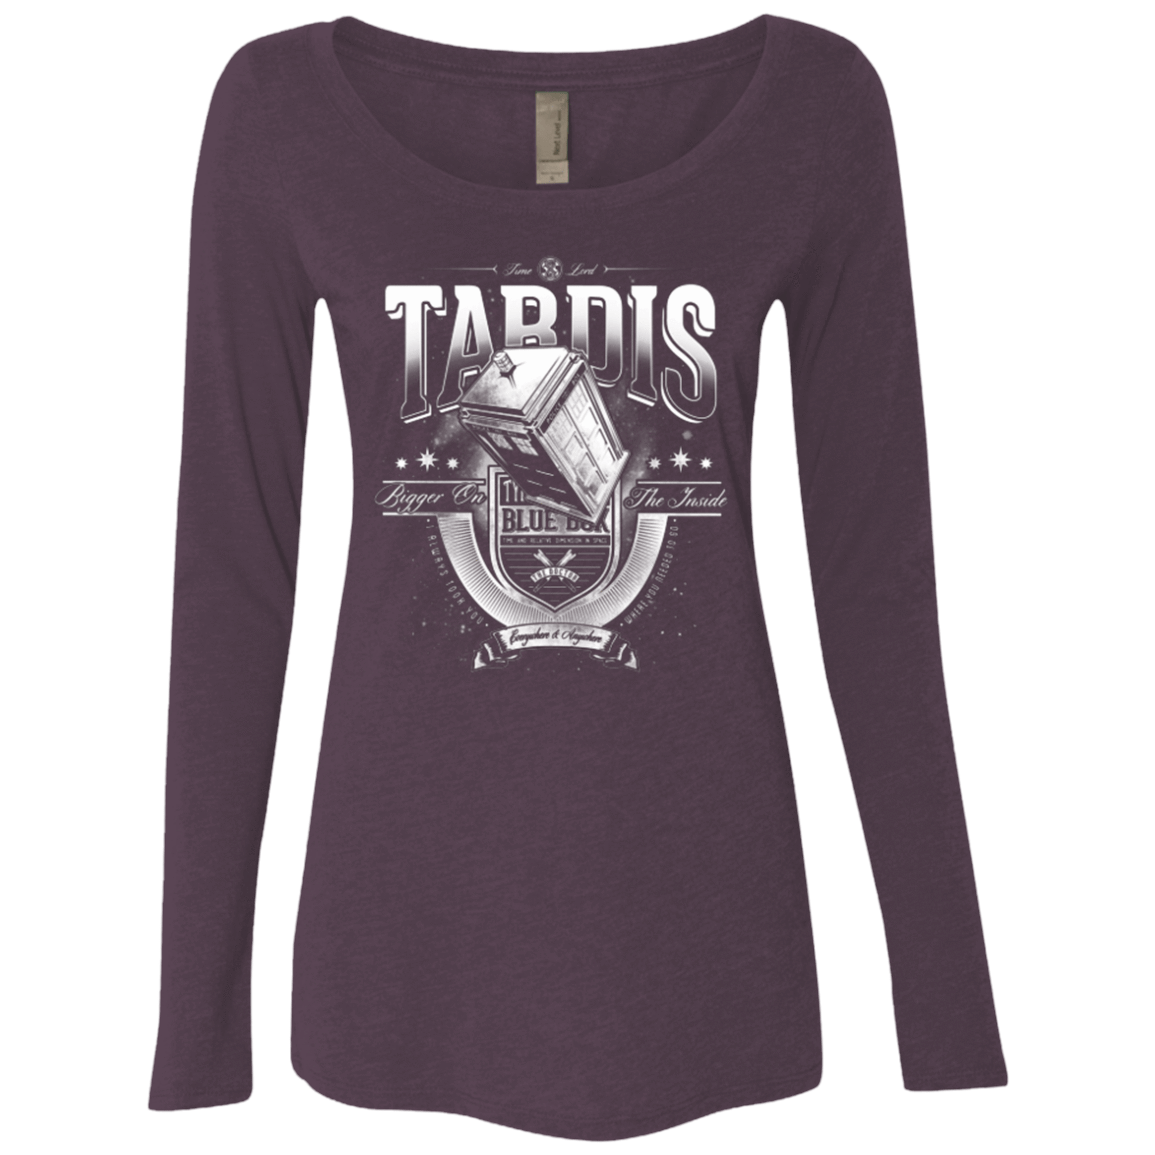 T-Shirts Vintage Purple / Small Everywhere and Anywhere Women's Triblend Long Sleeve Shirt